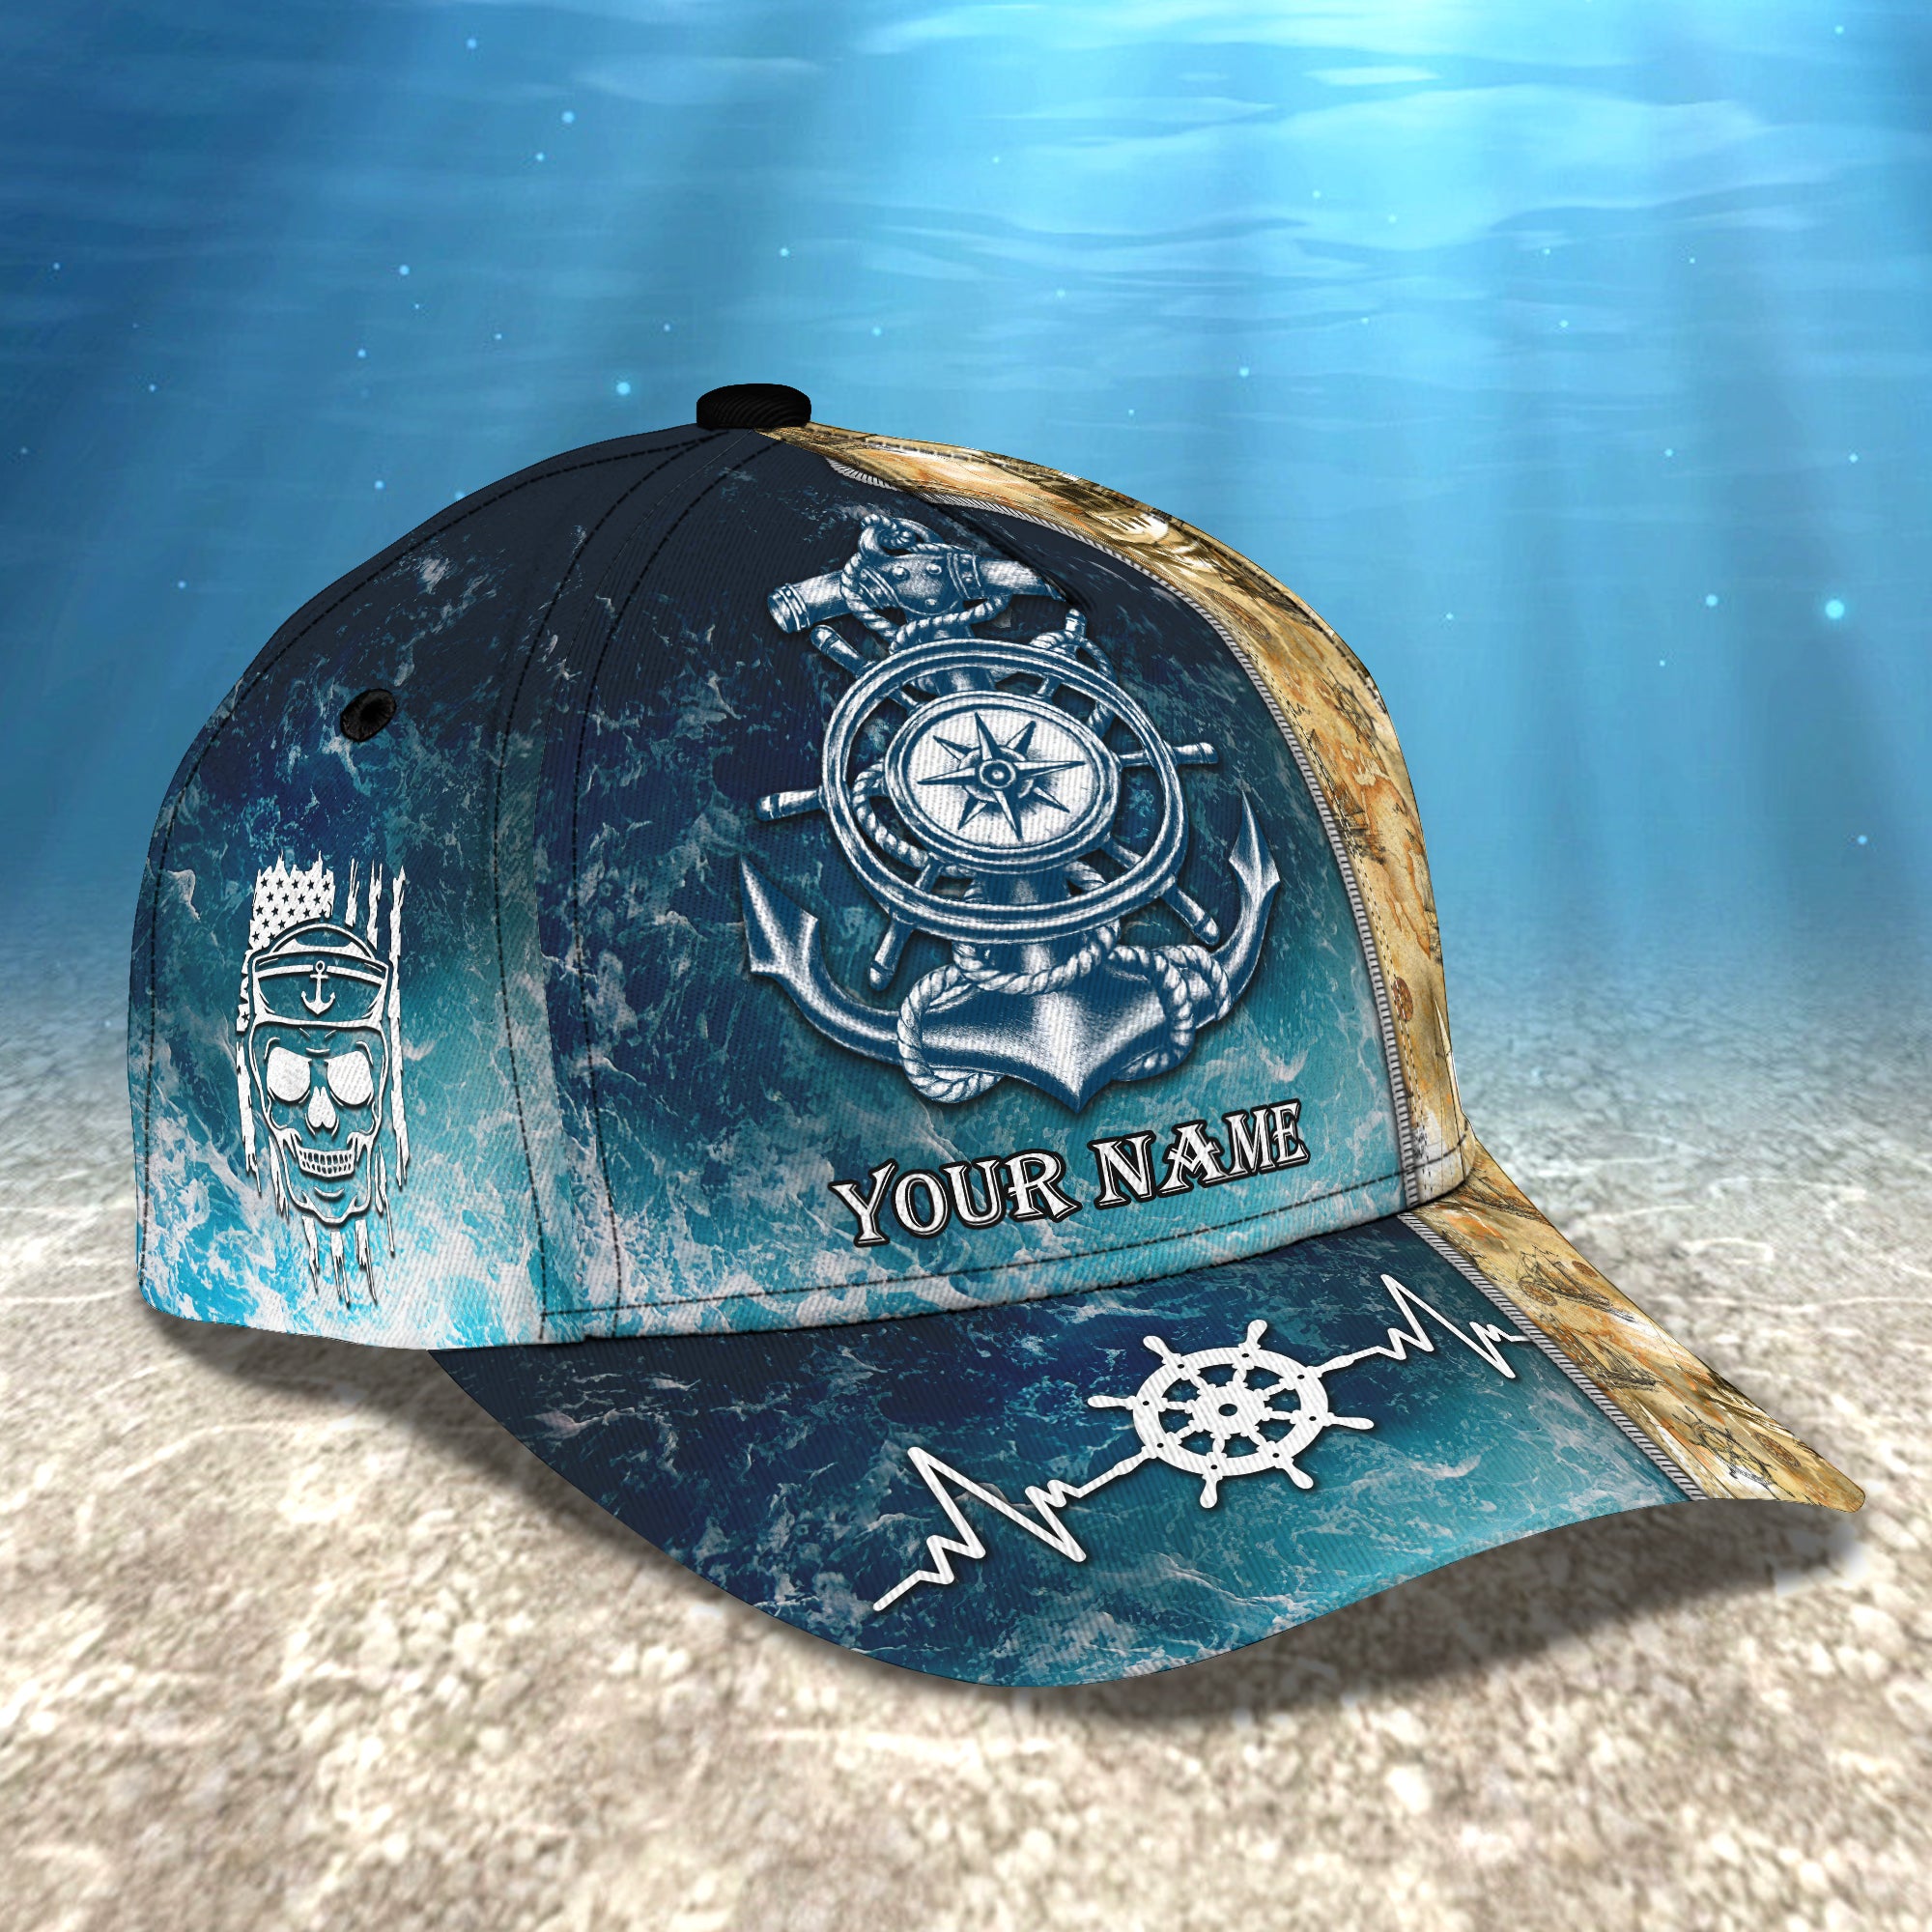 Sailor - Personalized Name Cap - Nsd99